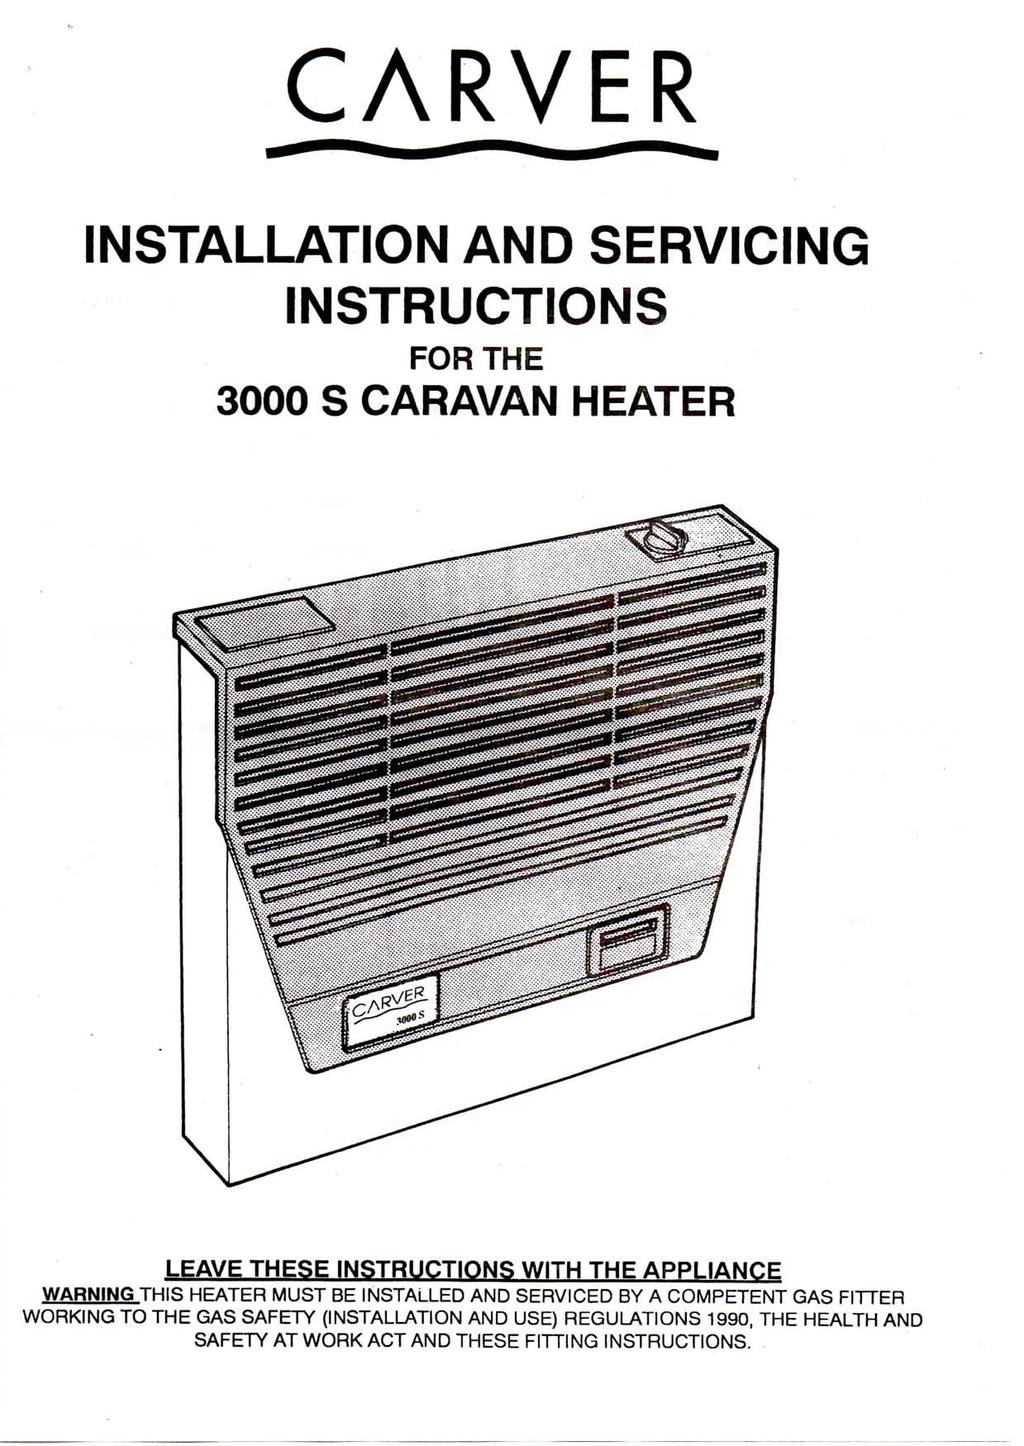 CARVER INSTALLATION AND SERVICING INSTRUCTIONS FOR THE 3000 S CARAVAN HEATER LEAVE THESE INSTRUCTIONS WITH THE APPLIANCE WARNING THIS HEATER MUST BE INSTALLED AND